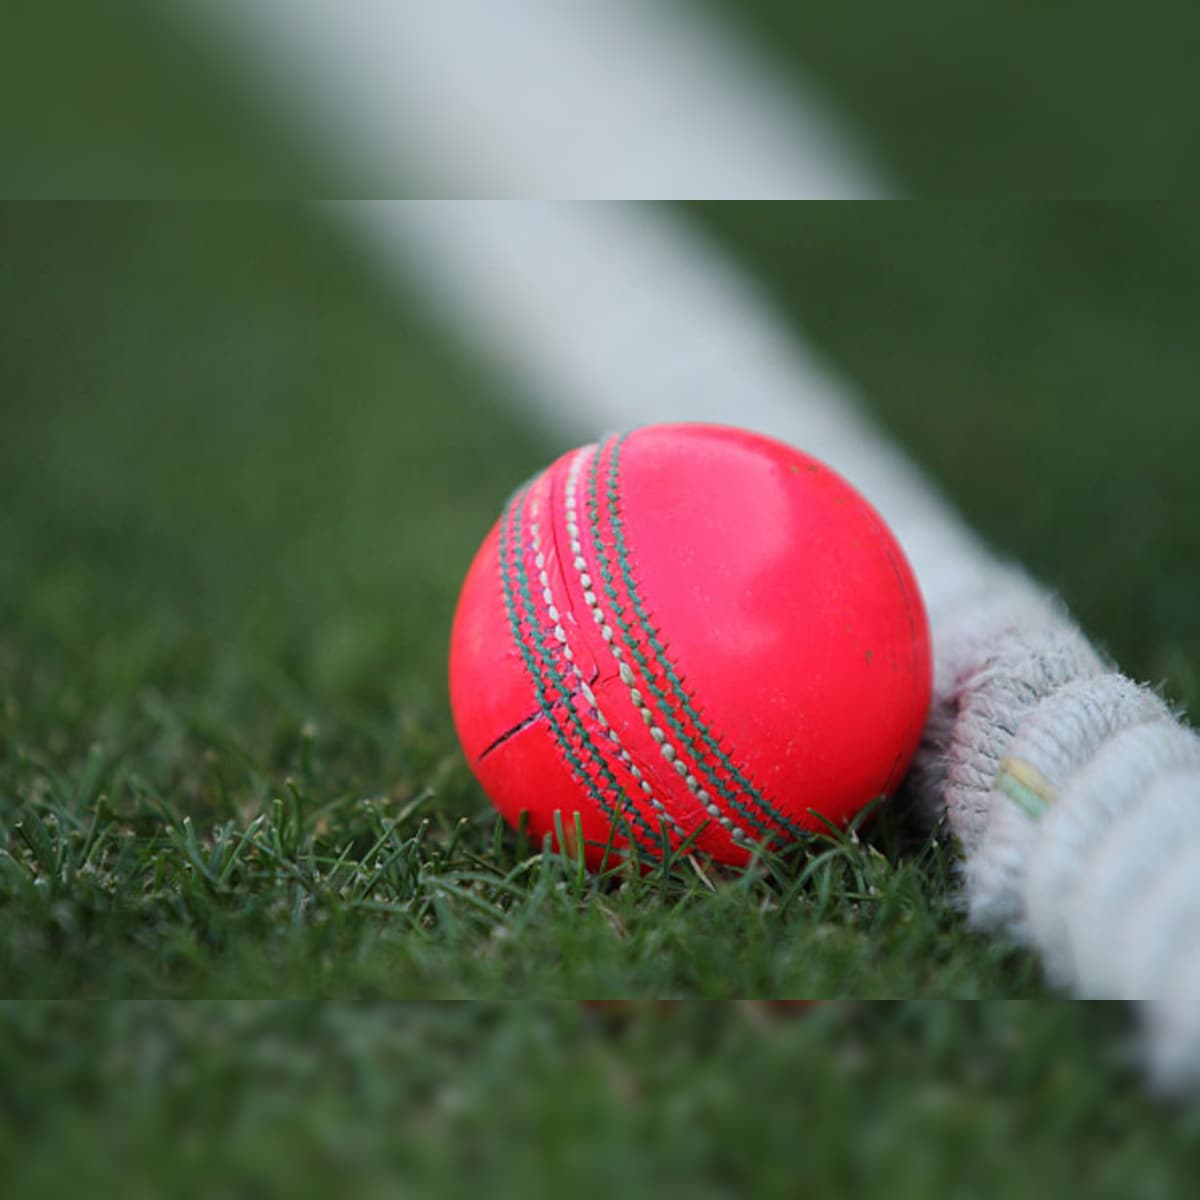 Get Used To Pink Ball Tests, Says NZ Cricket Chief